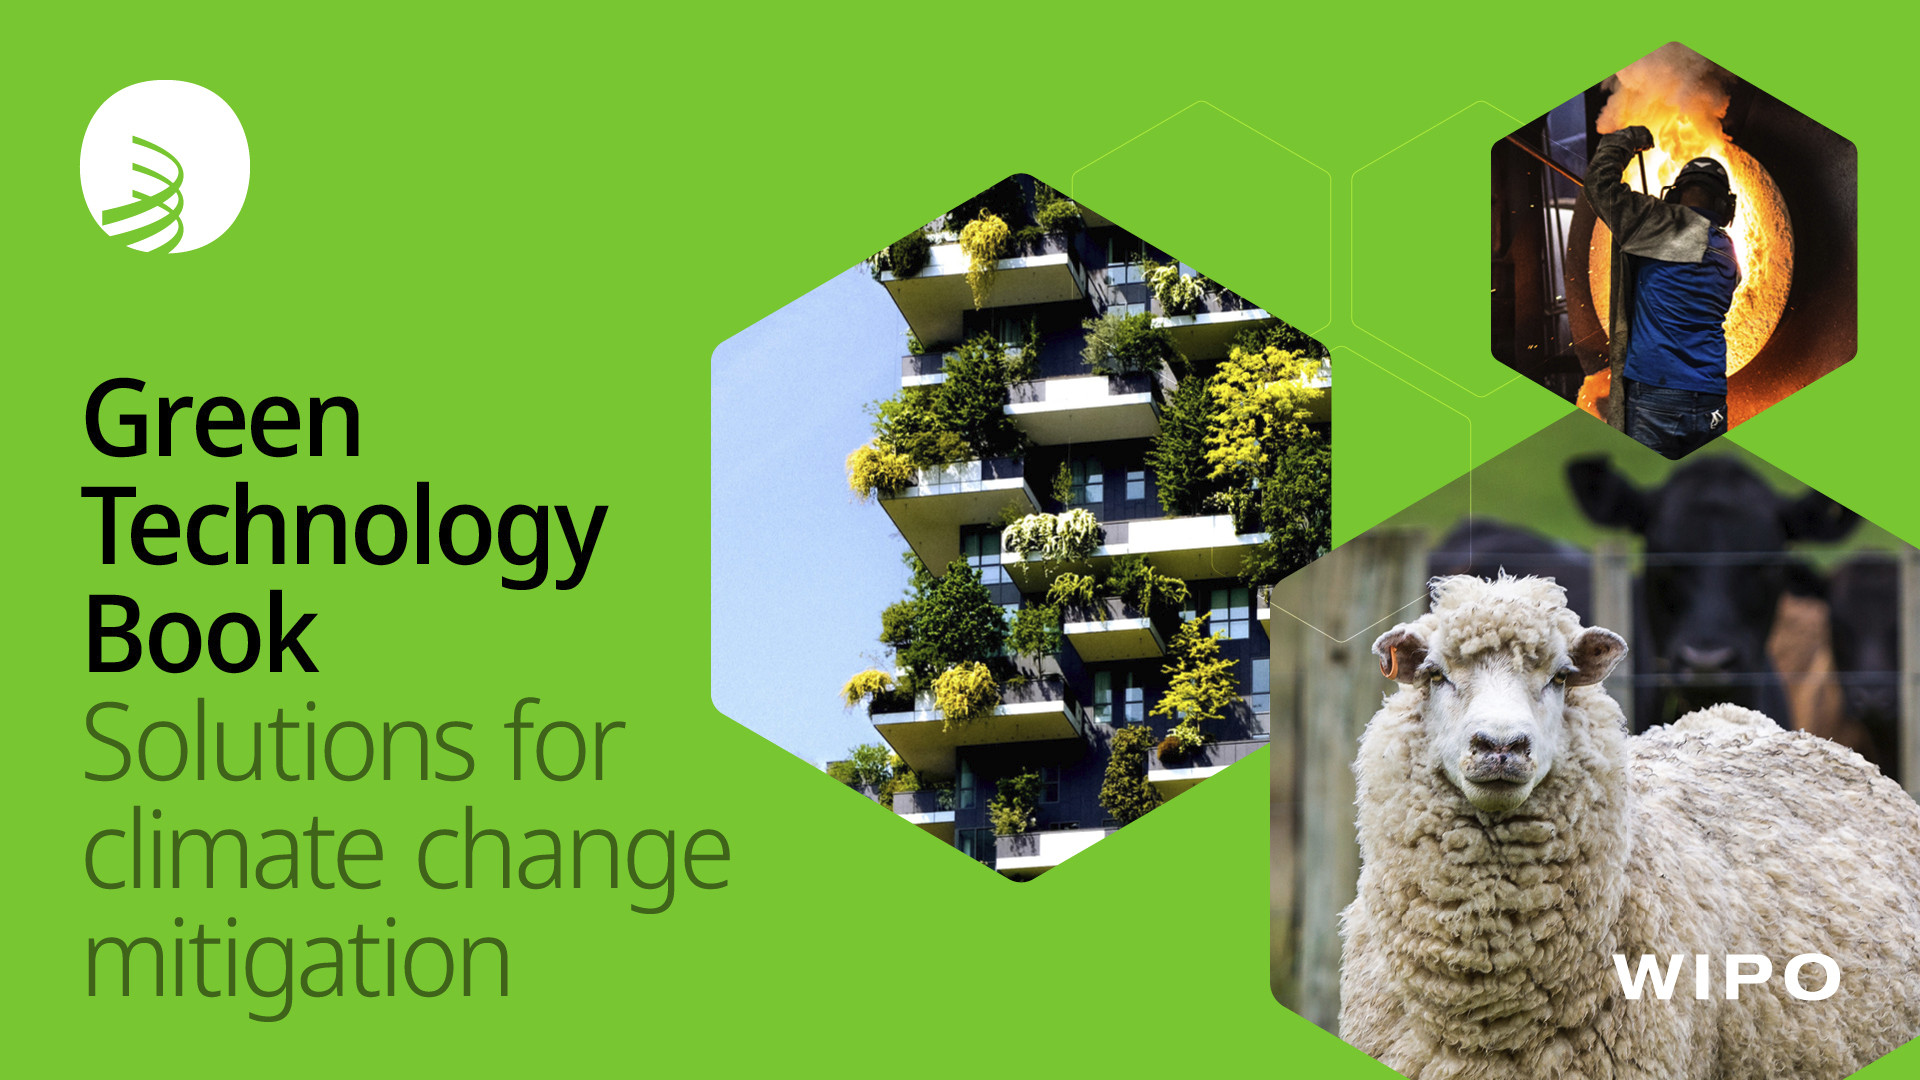 WIPO Green Technology Book | Solutions for Climate Change Mitigation